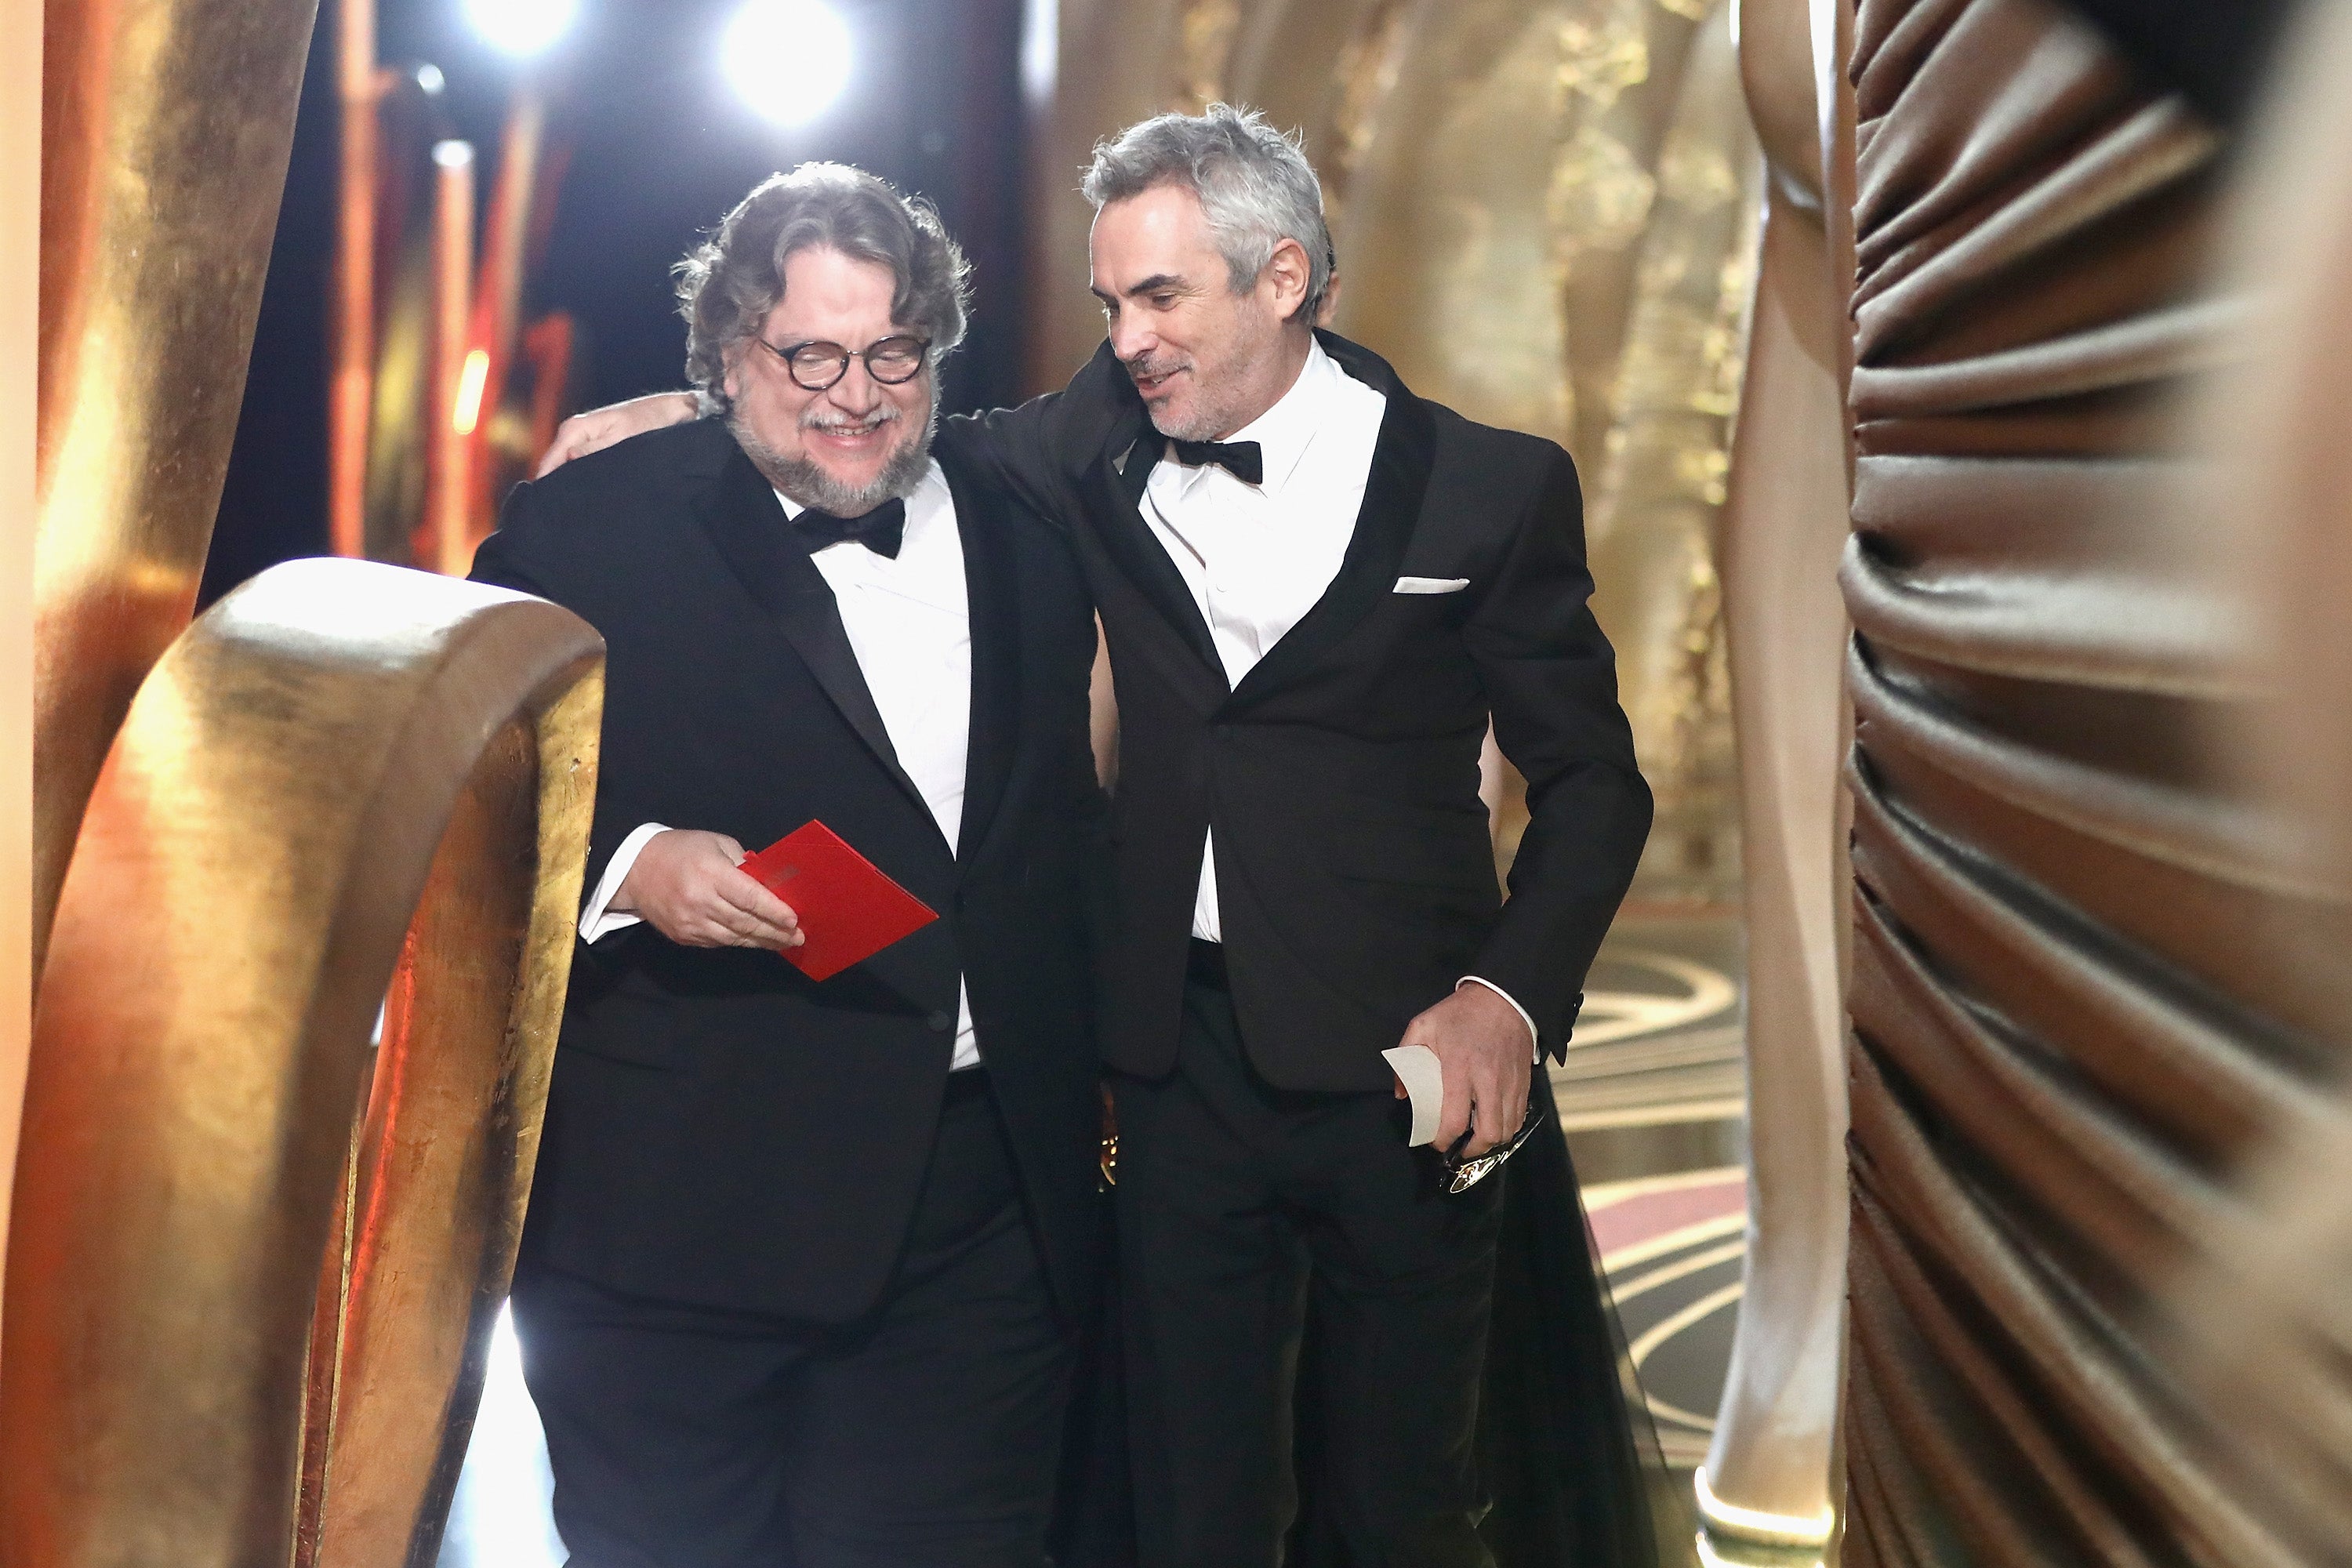 Director Guillermo del Toro (L) and winner of Best Foreign Language Film, Best Director and Best Cinematography for ‘Roma’, Alfonso Cuaron walk off stage during the 91st Annual Academy Awards